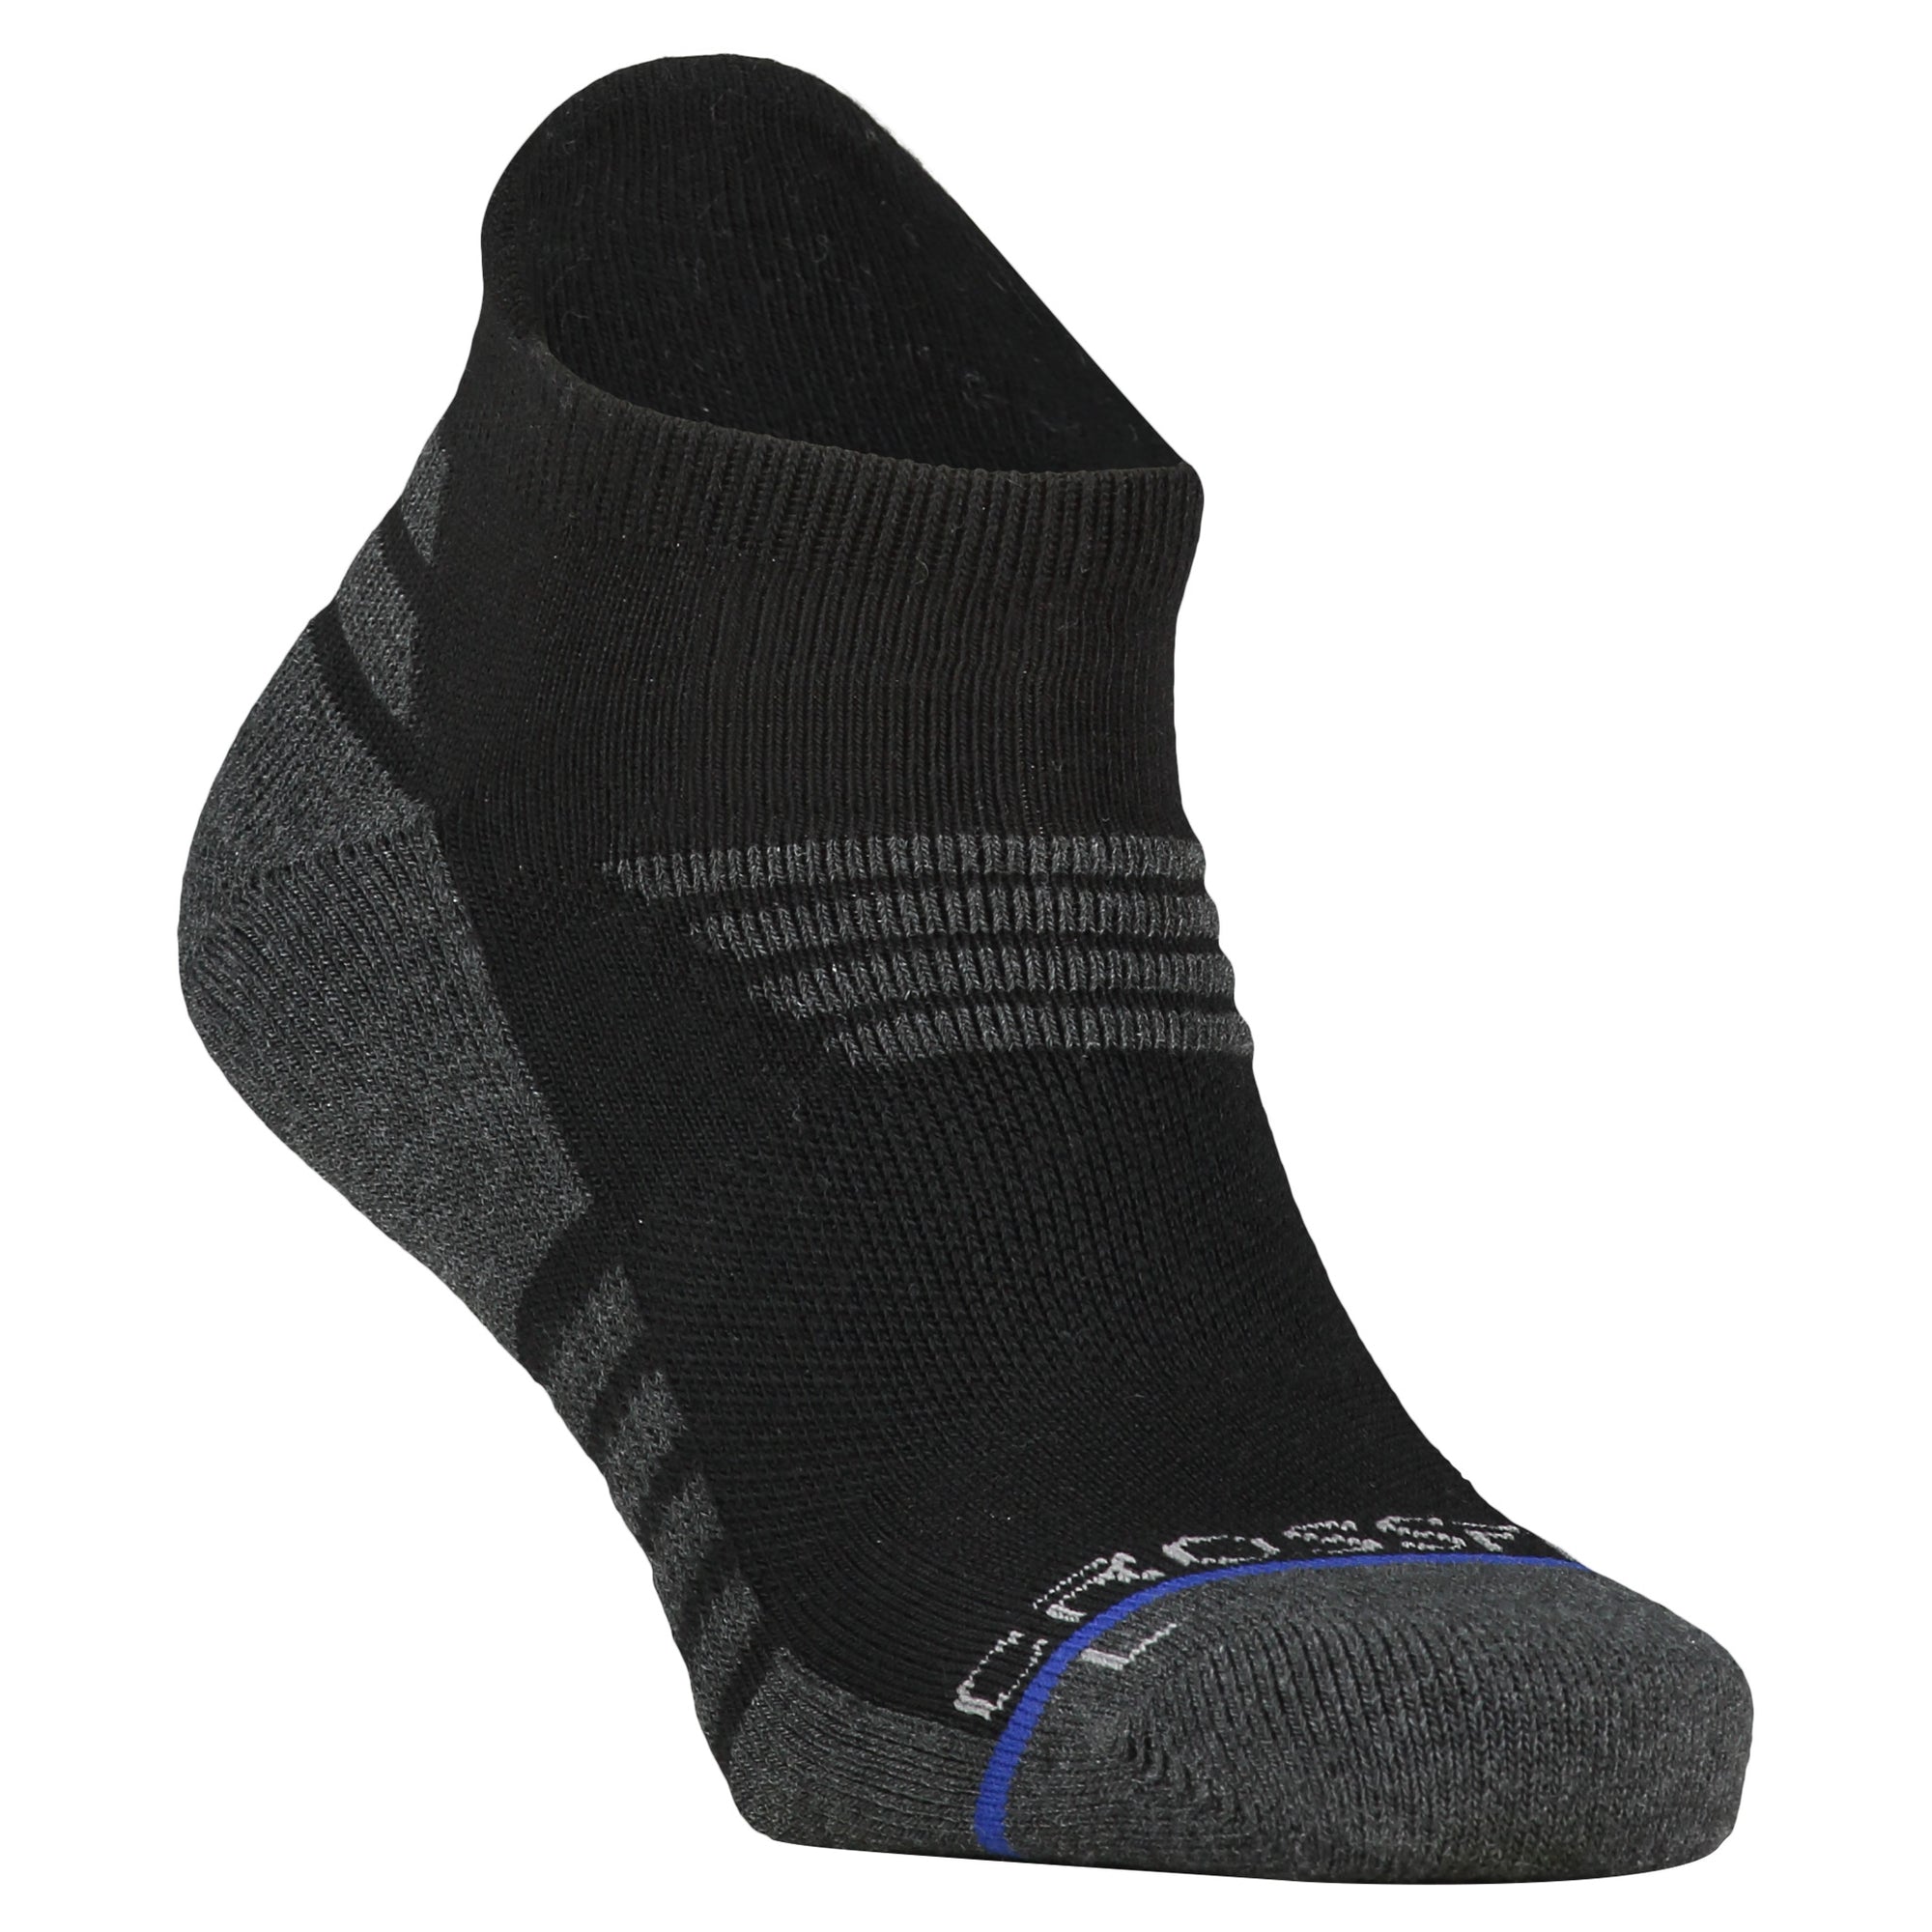 Crossfly men's Tempo Low Socks in black / charcoal from the Performance series, featuring AirBeams and 180 Hold.